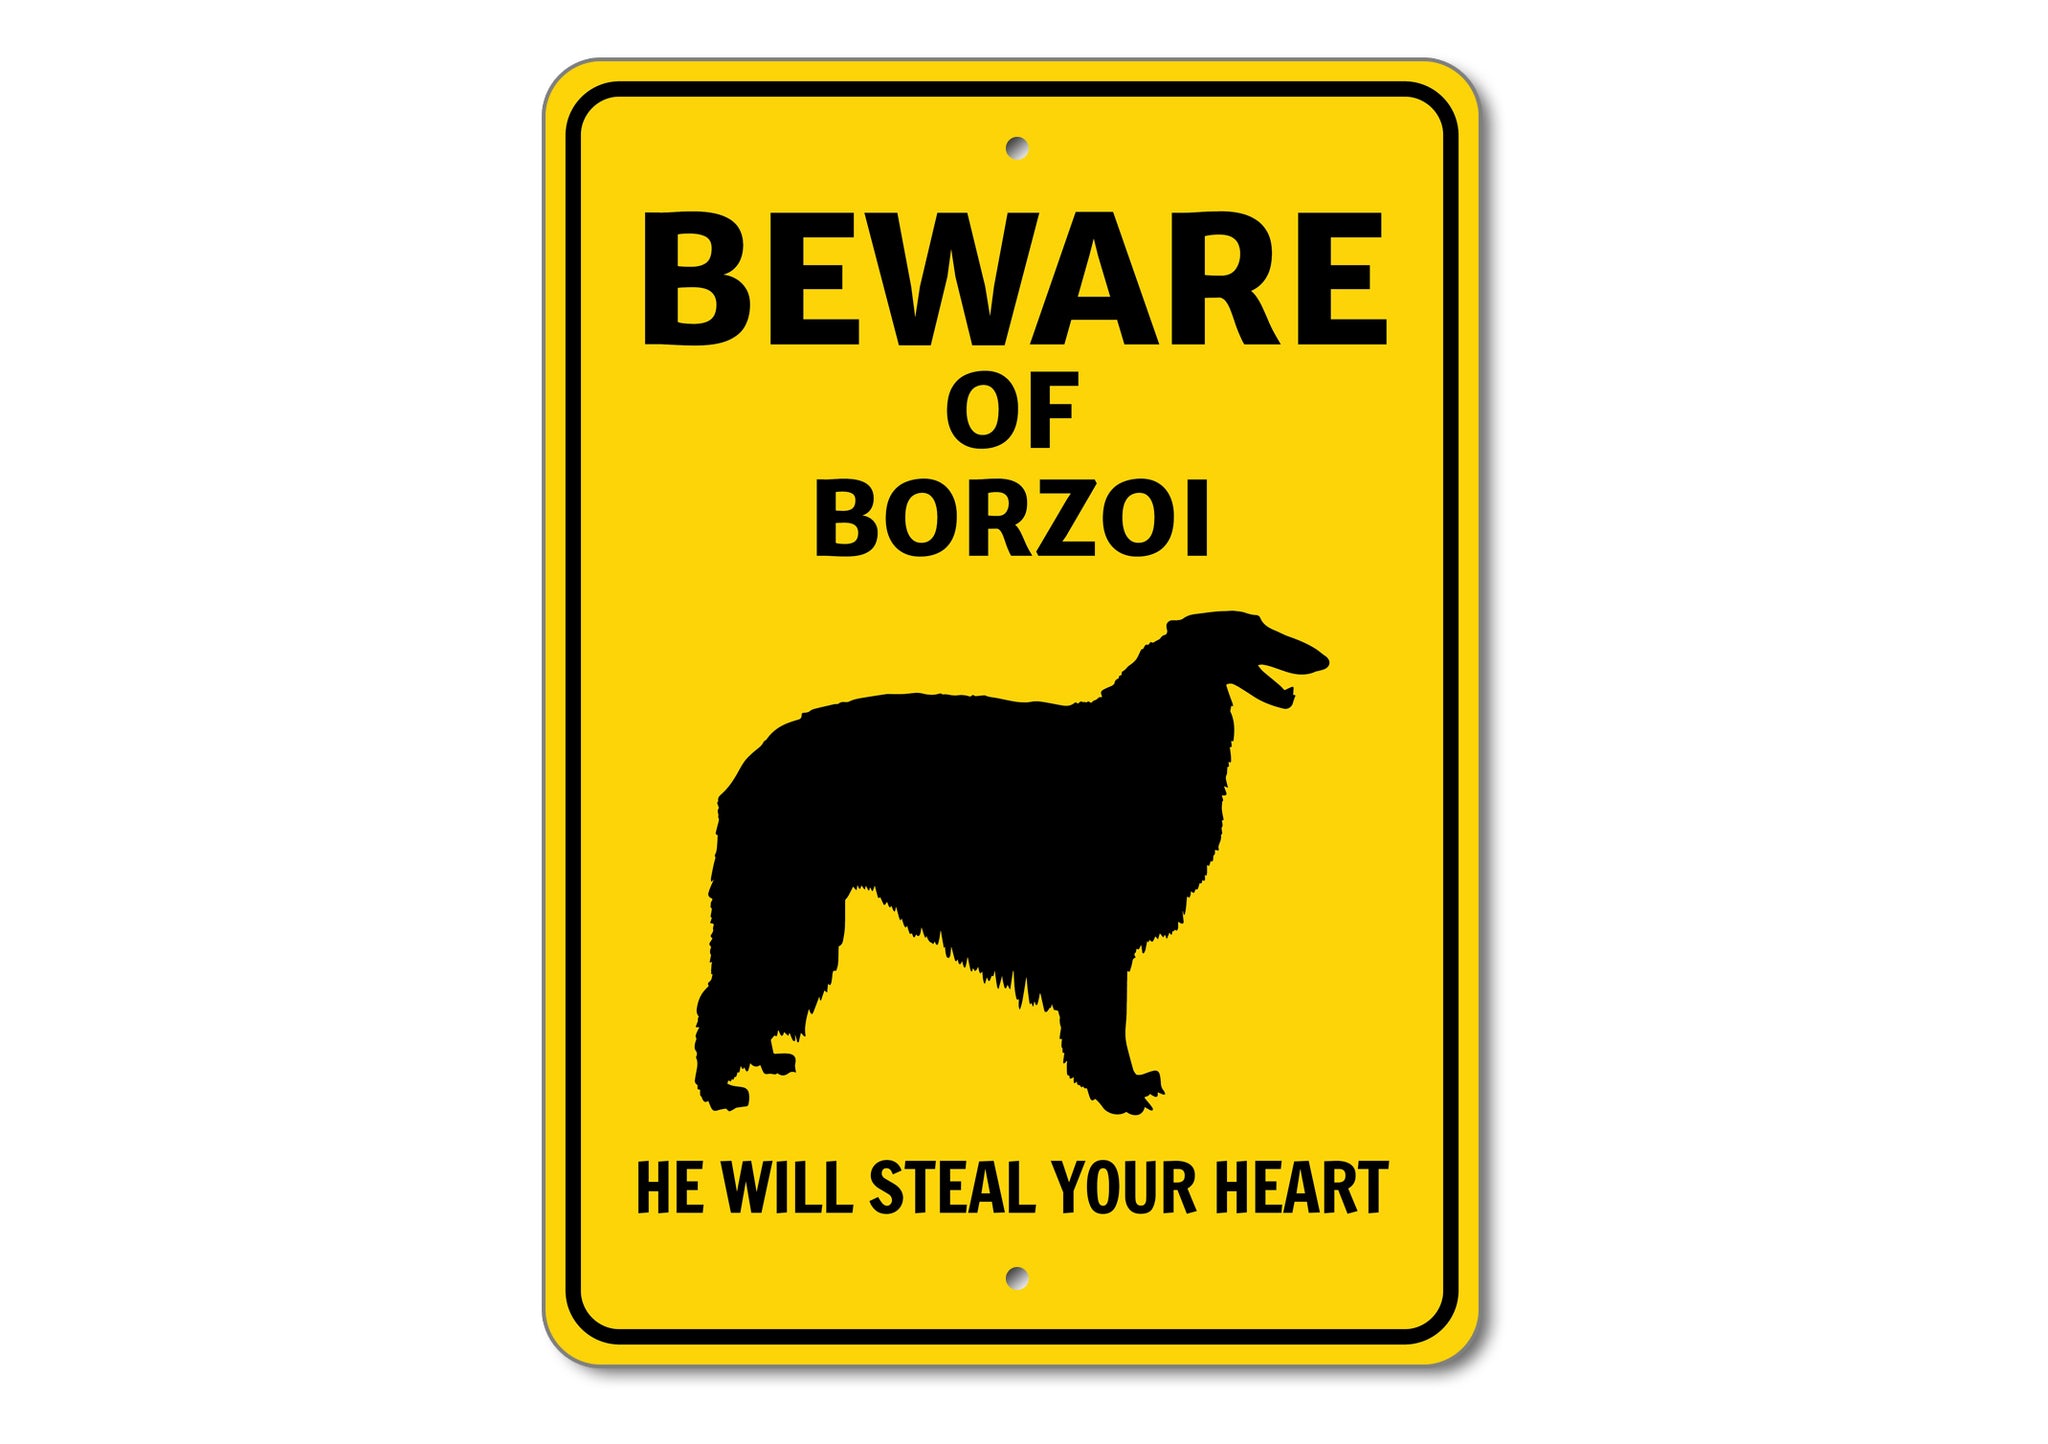 Beware He Will Steal Your Heart K9 Sign - Dog Names Starting with "B part 1"